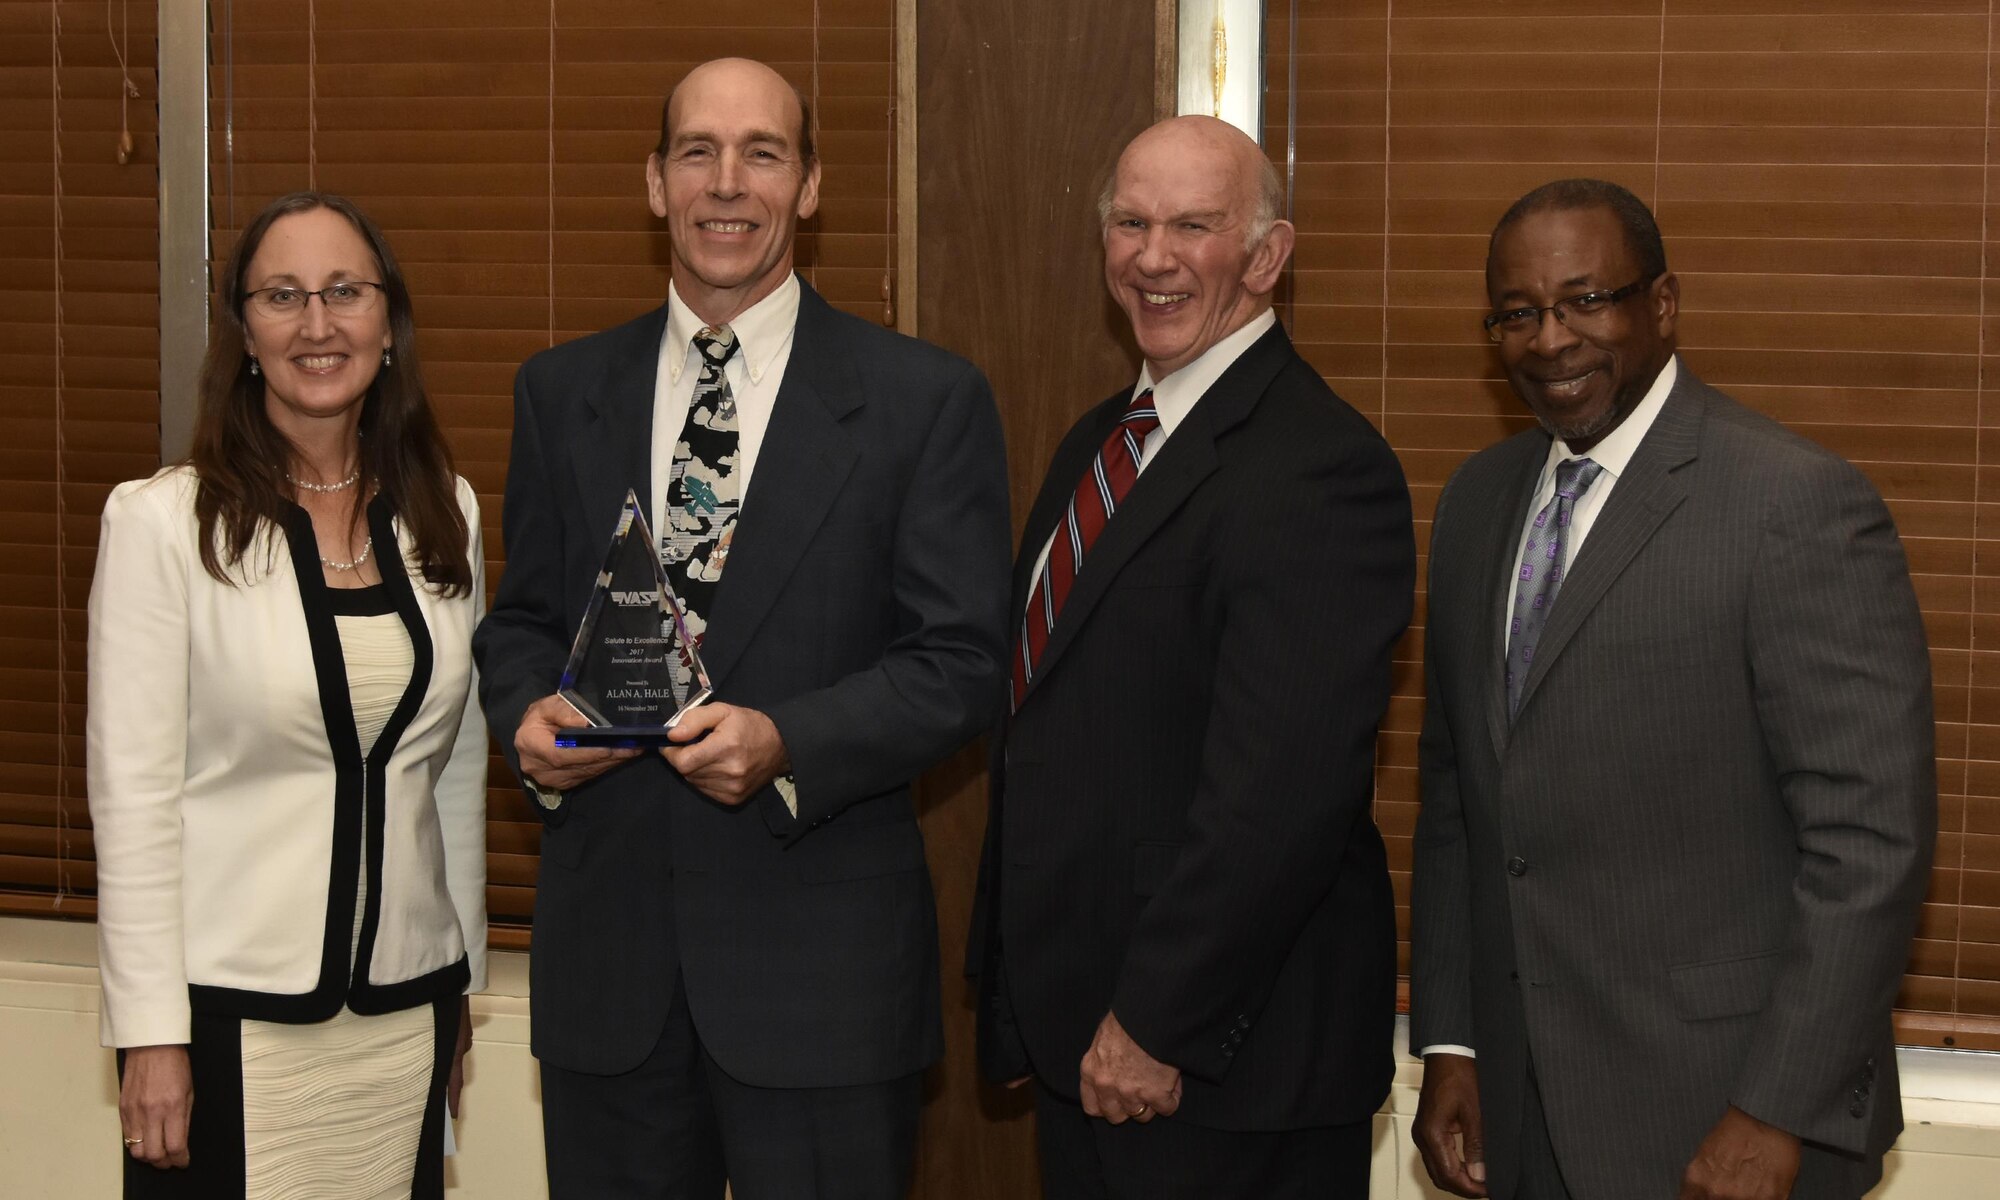 Dr. Alan Hale (second from left), NAS Model & Simulation engineer, receives the Innovation Award from NAS General Manager Cynthia Rivera during the National Aerospace Solutions 2017 Salute to Excellence Annual Awards Banquet Nov. 16 at the Arnold Lakeside Center, Arnold AFB. Also pictured is NAS Deputy General Manager Doug Pearson and NAS Technical Director Woodrow Whitlow. (U.S. Air Force photo/Rick Goodfriend)